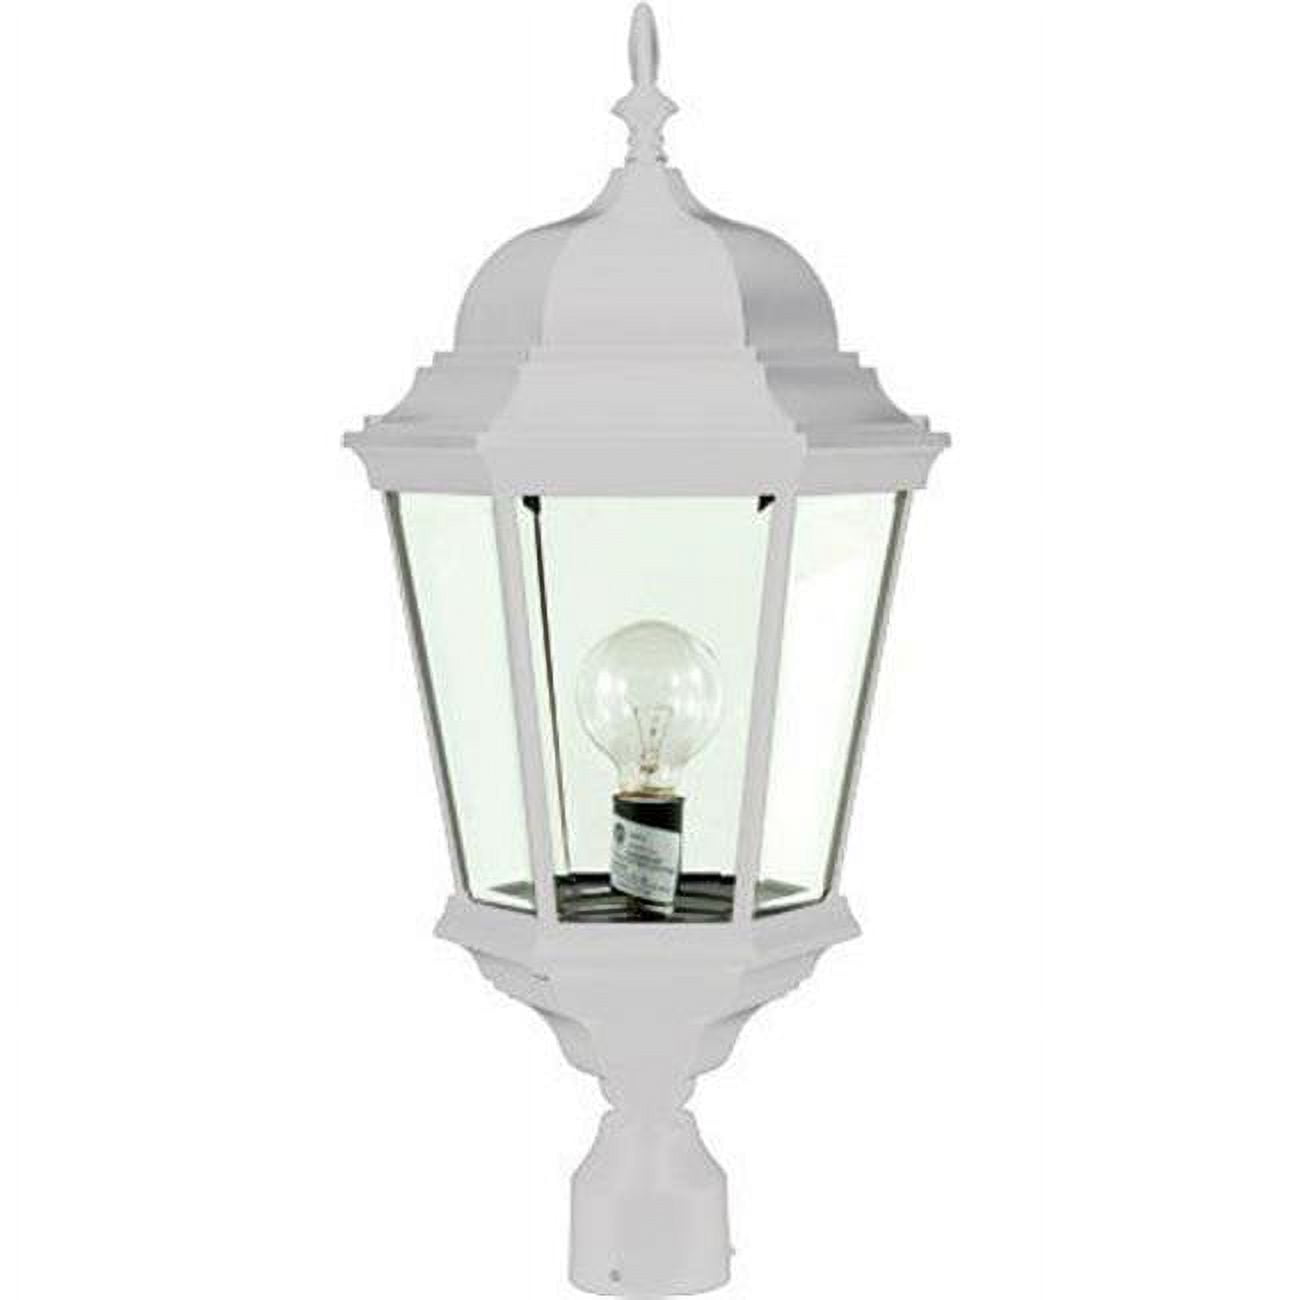 Picture of Dabmar Lighting GM237-W-FROST Post Top Fixture with Frosted Glass 26W DL-S26-GU24 120V, White